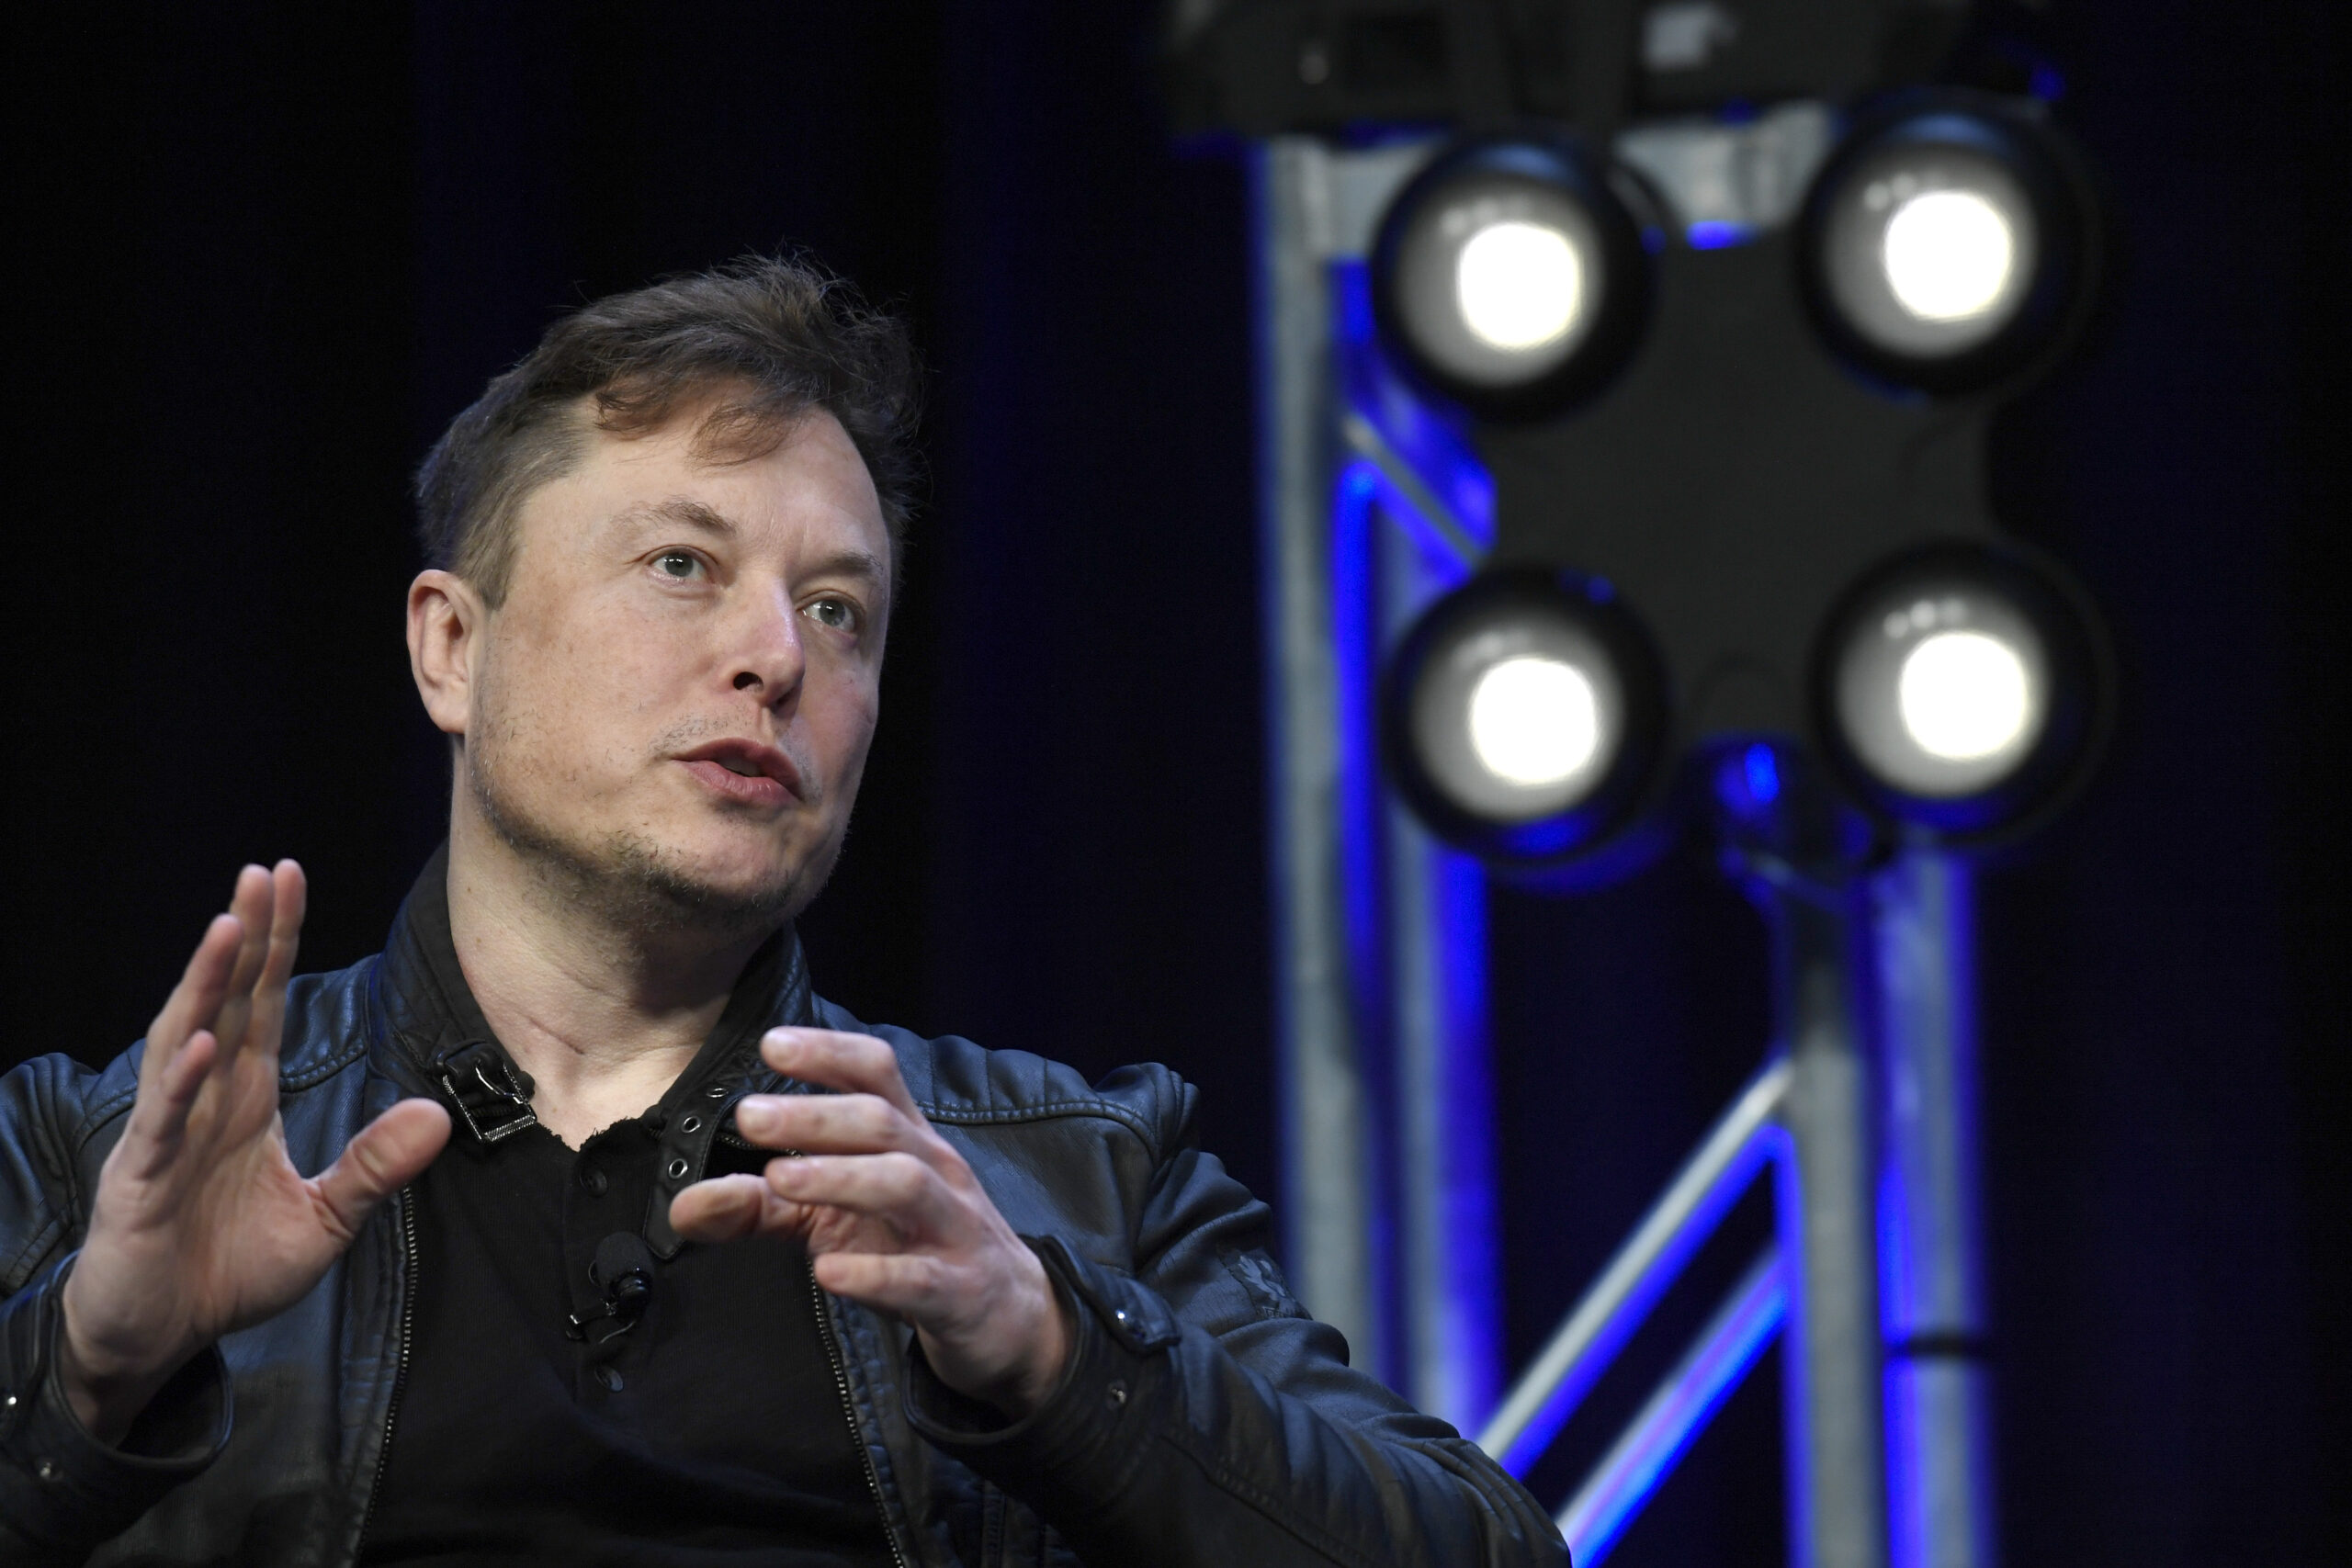 Elon Musk Reminds Us He’s Full of Sh*t with Ridiculous Denial About Twitter Boosting His Tweets